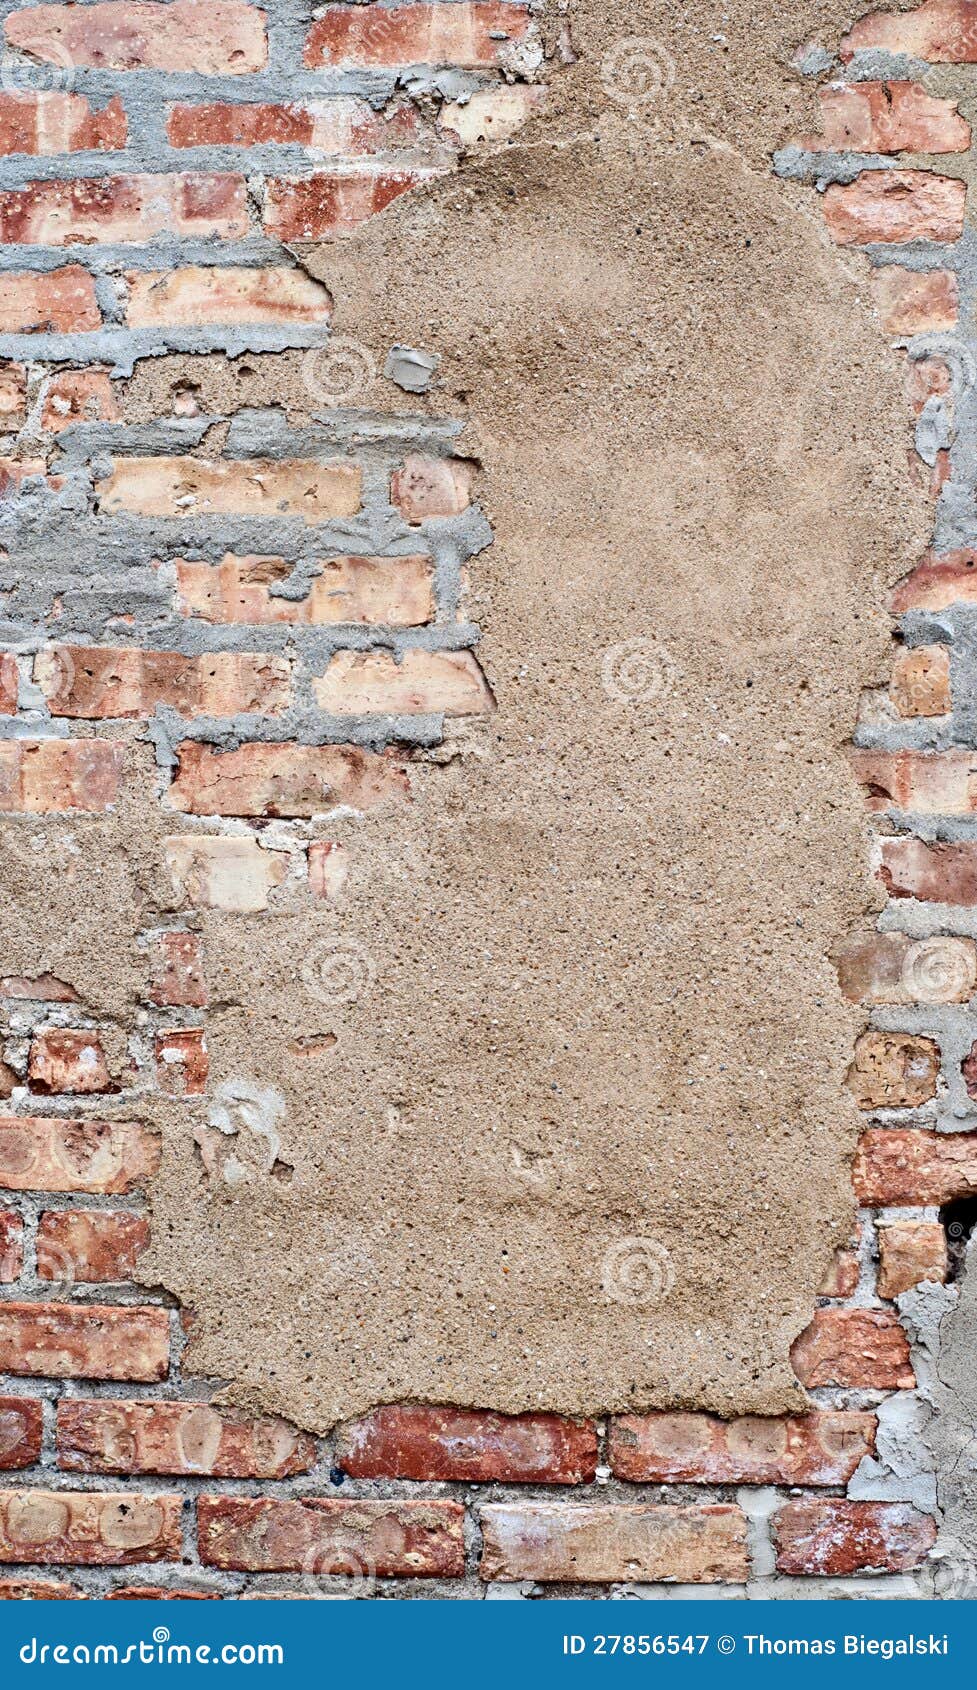 How To Patch A Hole In A Brick Wall